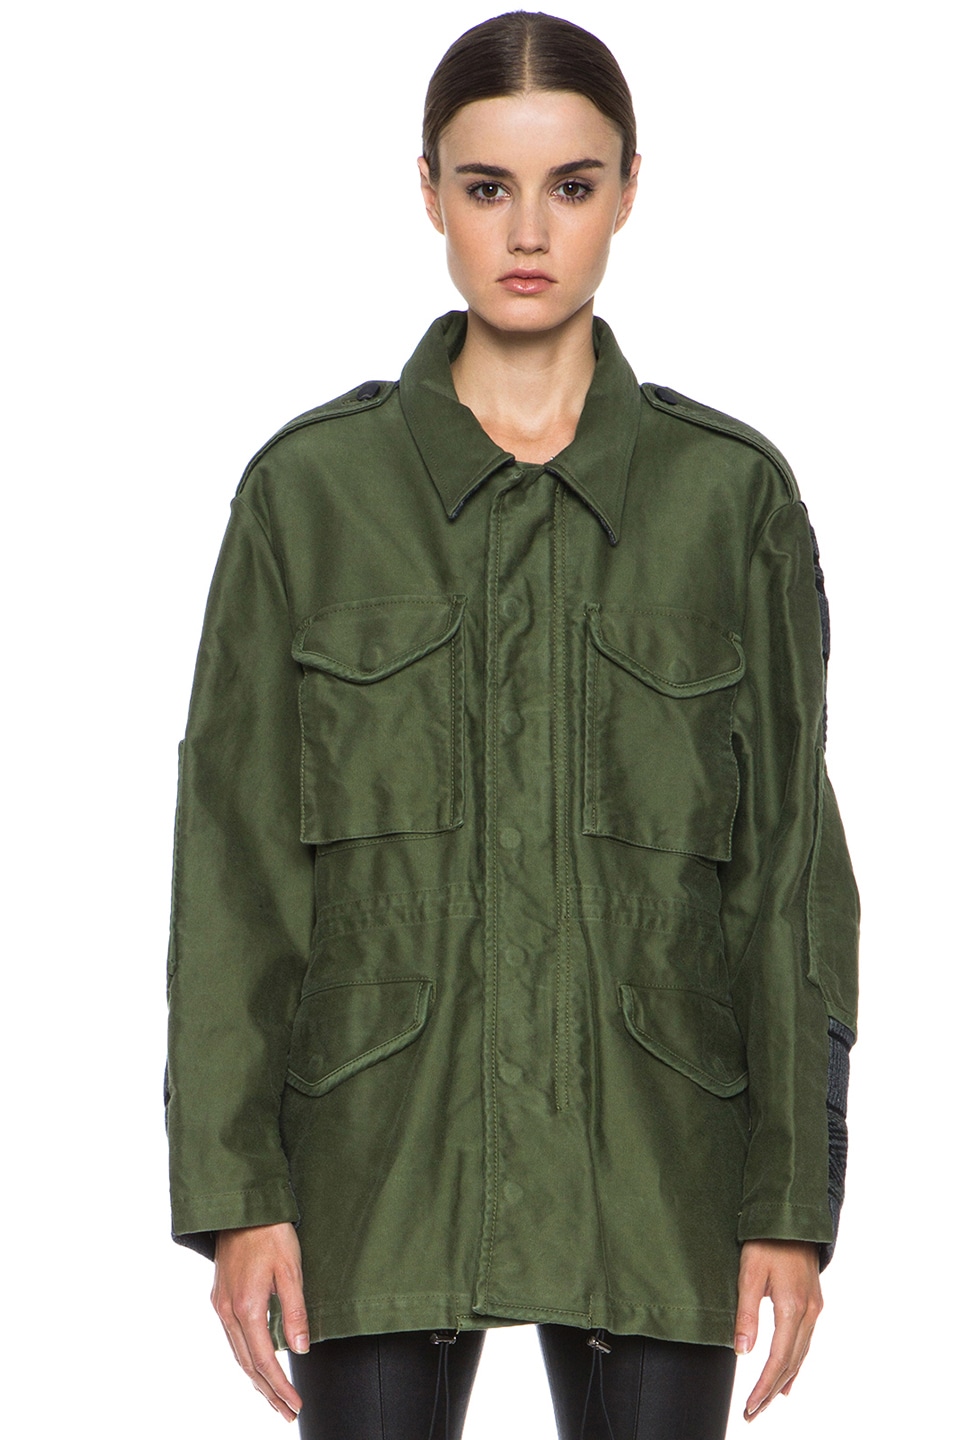 3.1 phillip lim Canvas Trompe L'oeil Anorak with Knit Back in Army ...